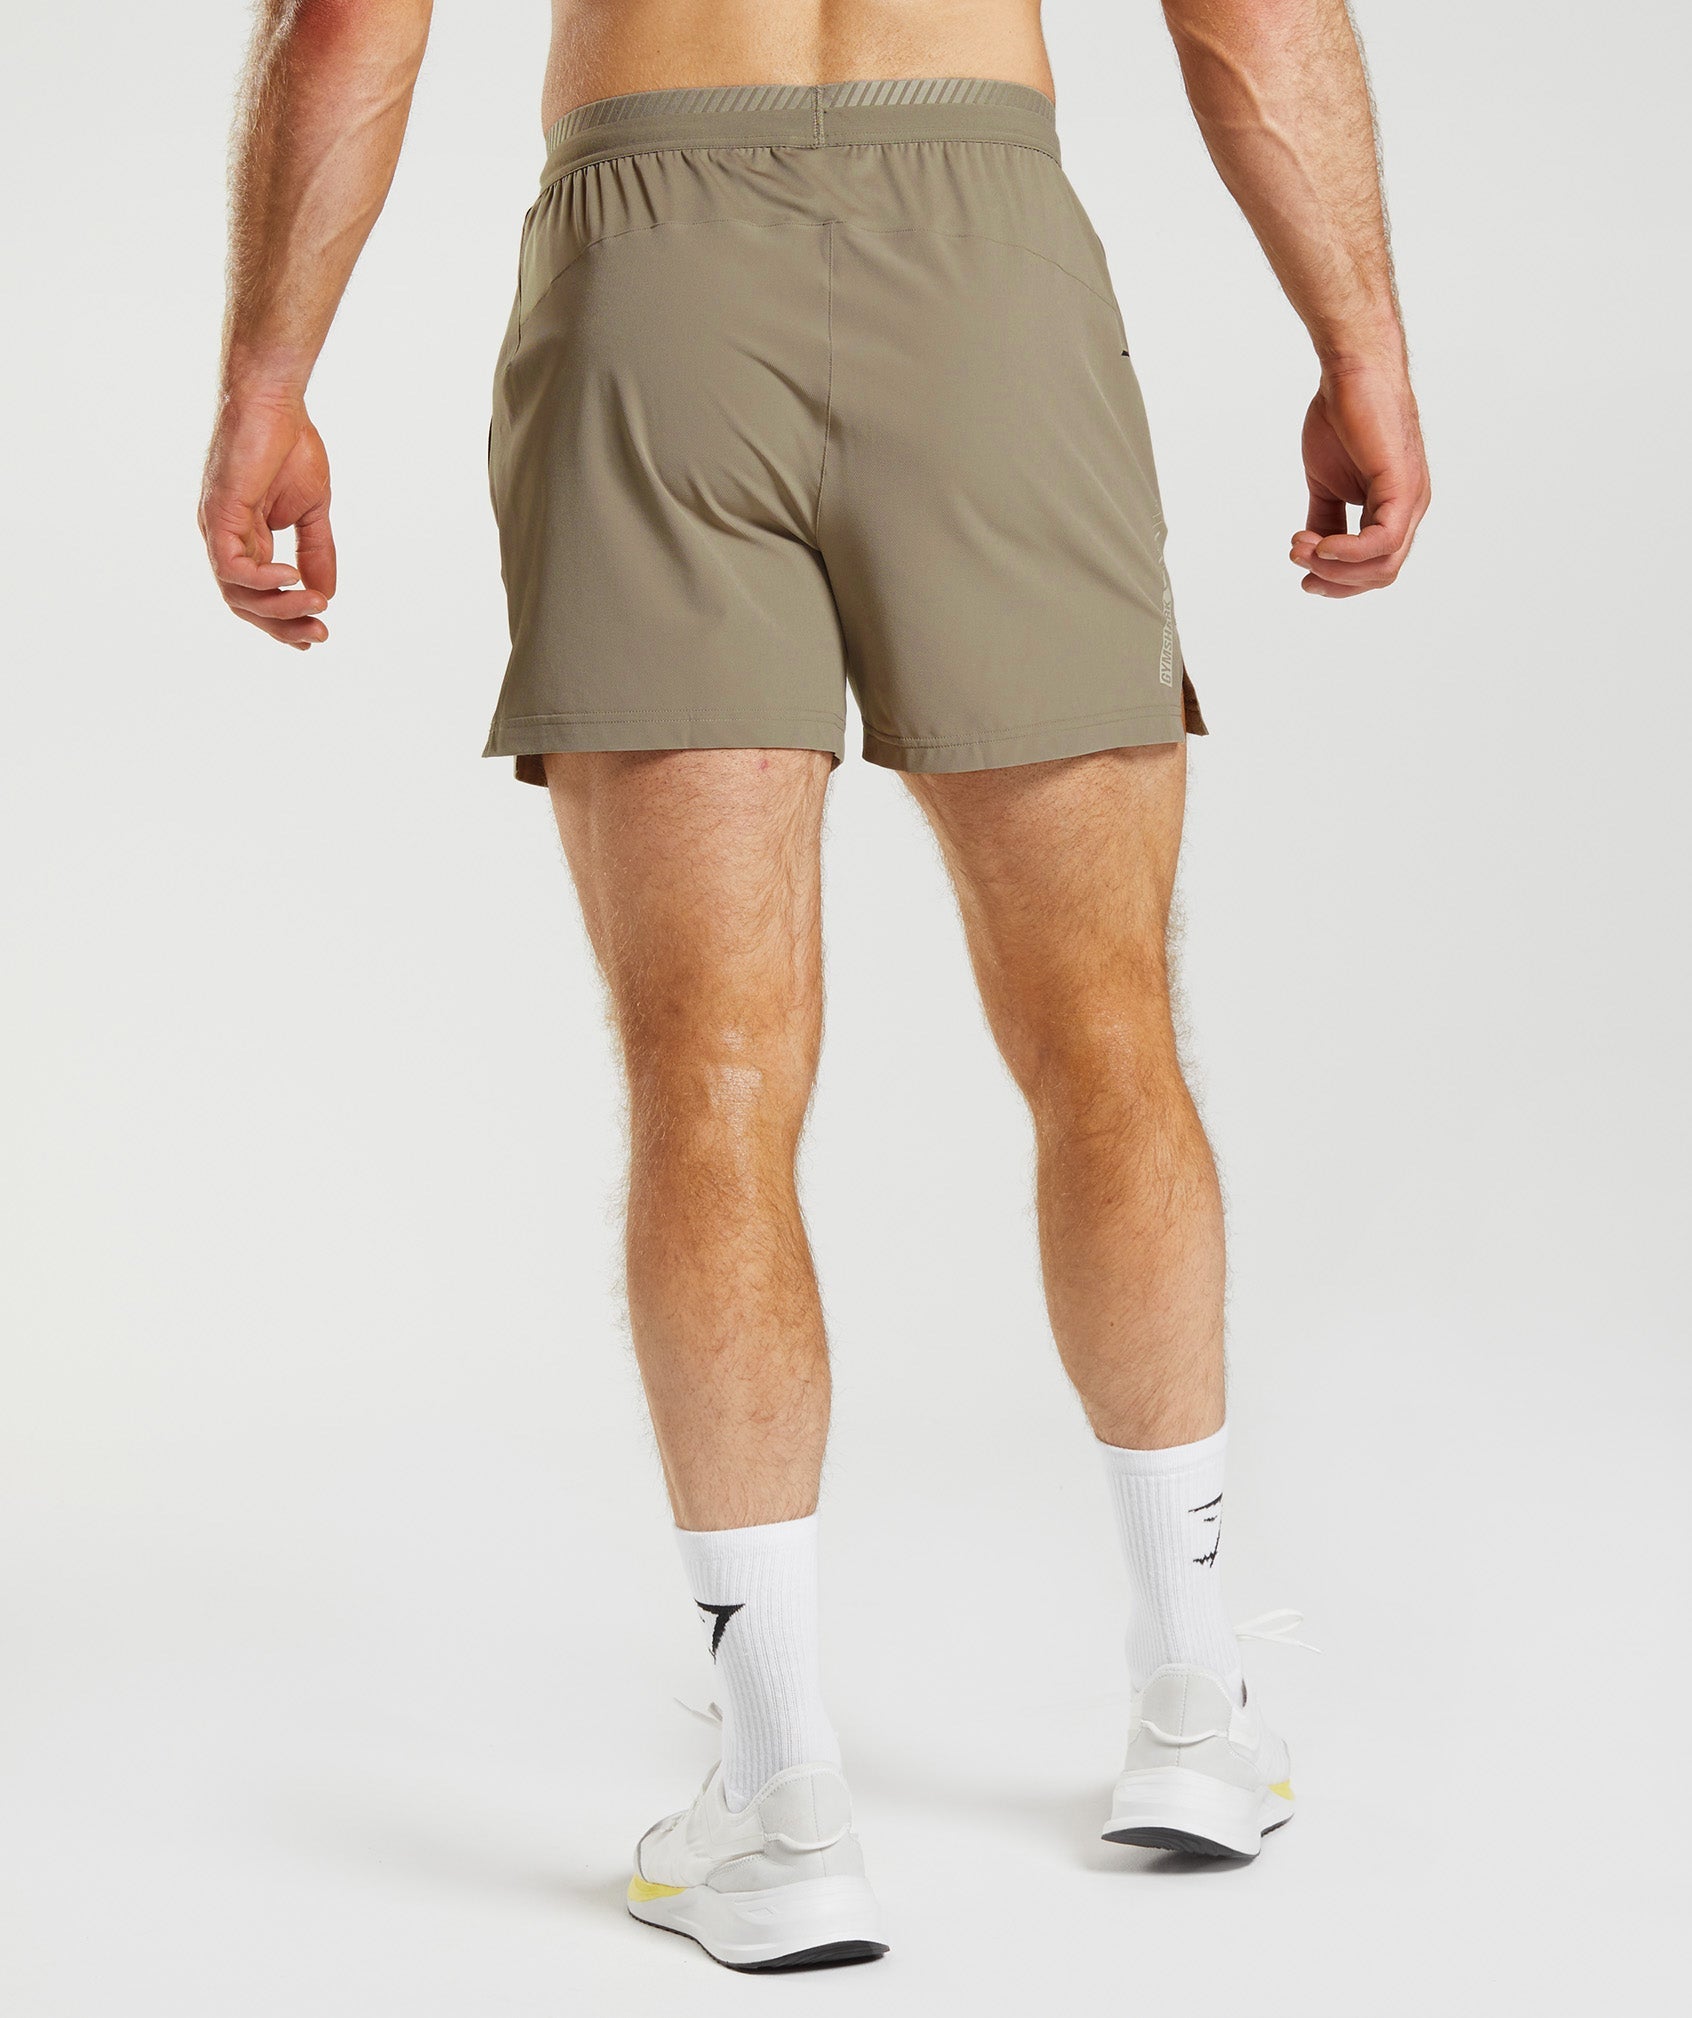 Apex 5" Hybrid Shorts in Earthy Brown - view 2